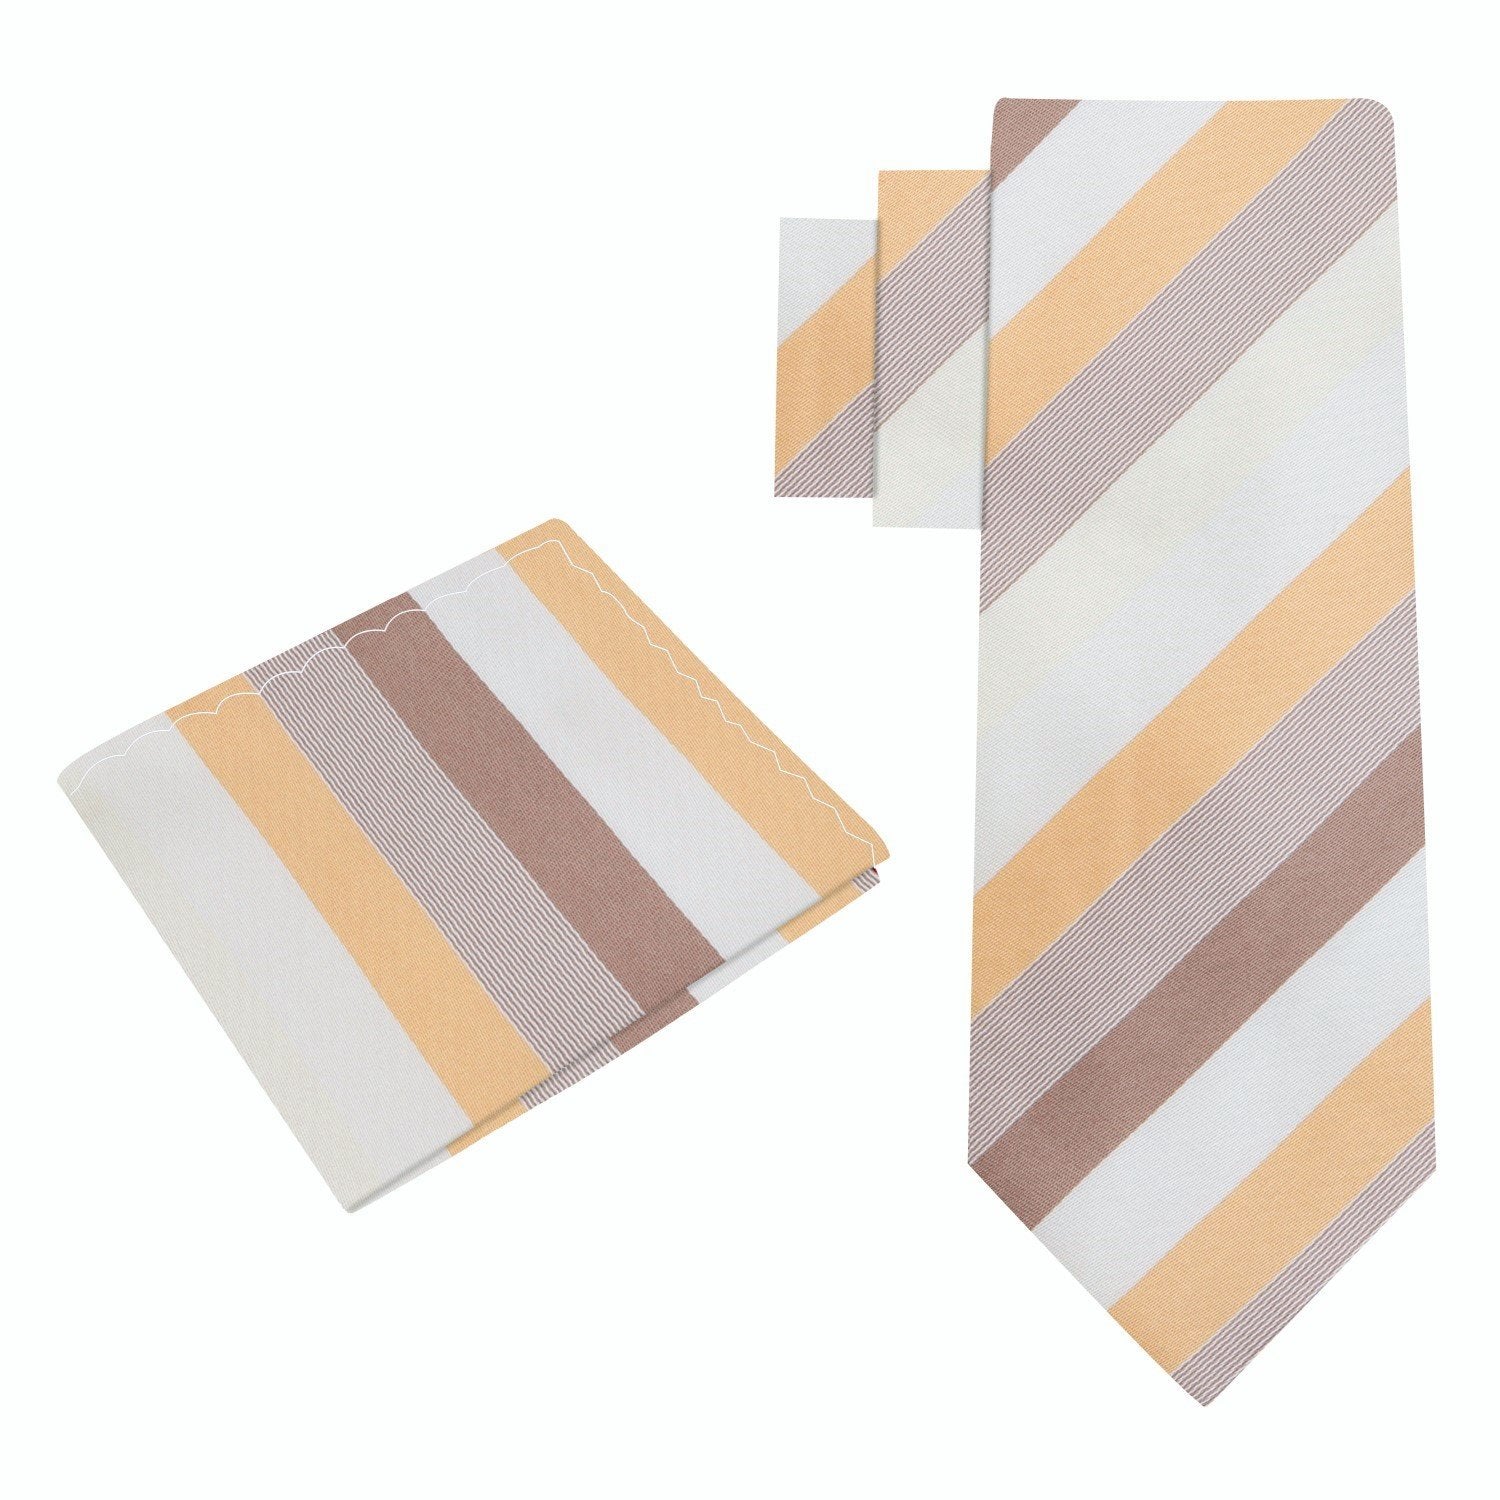 Alt View: Shades of Brown Stripe Tie and Pocket Square